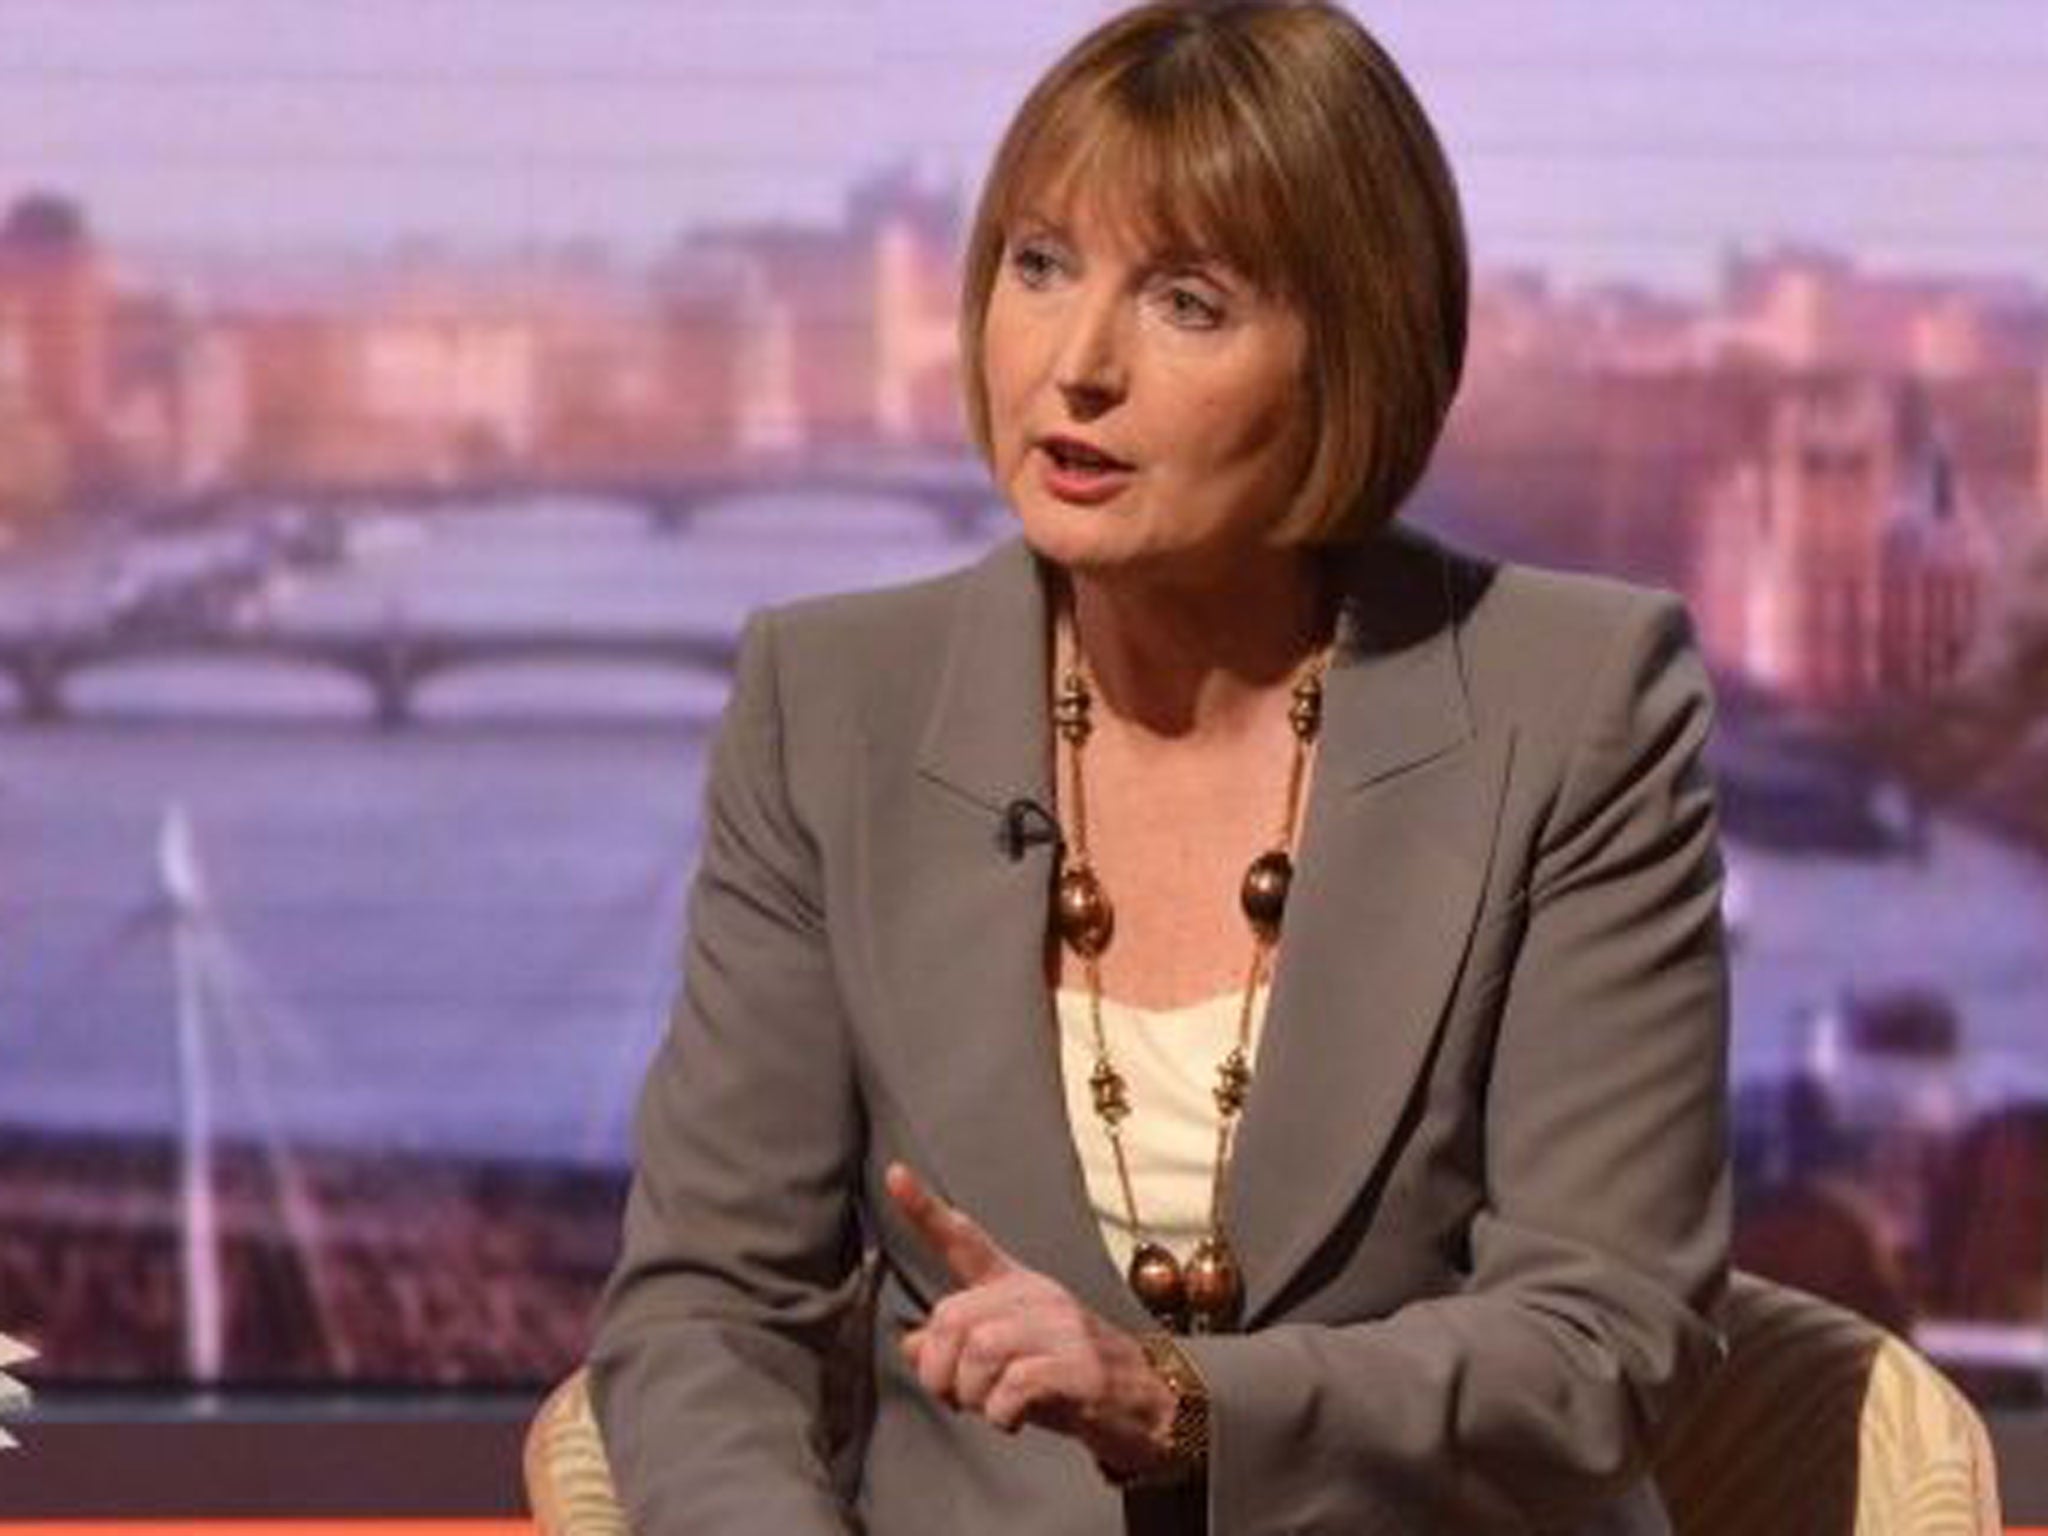 Harriet Harman, deputy leader of the Labour Party, on the BBC's Andrew Marr show this morning